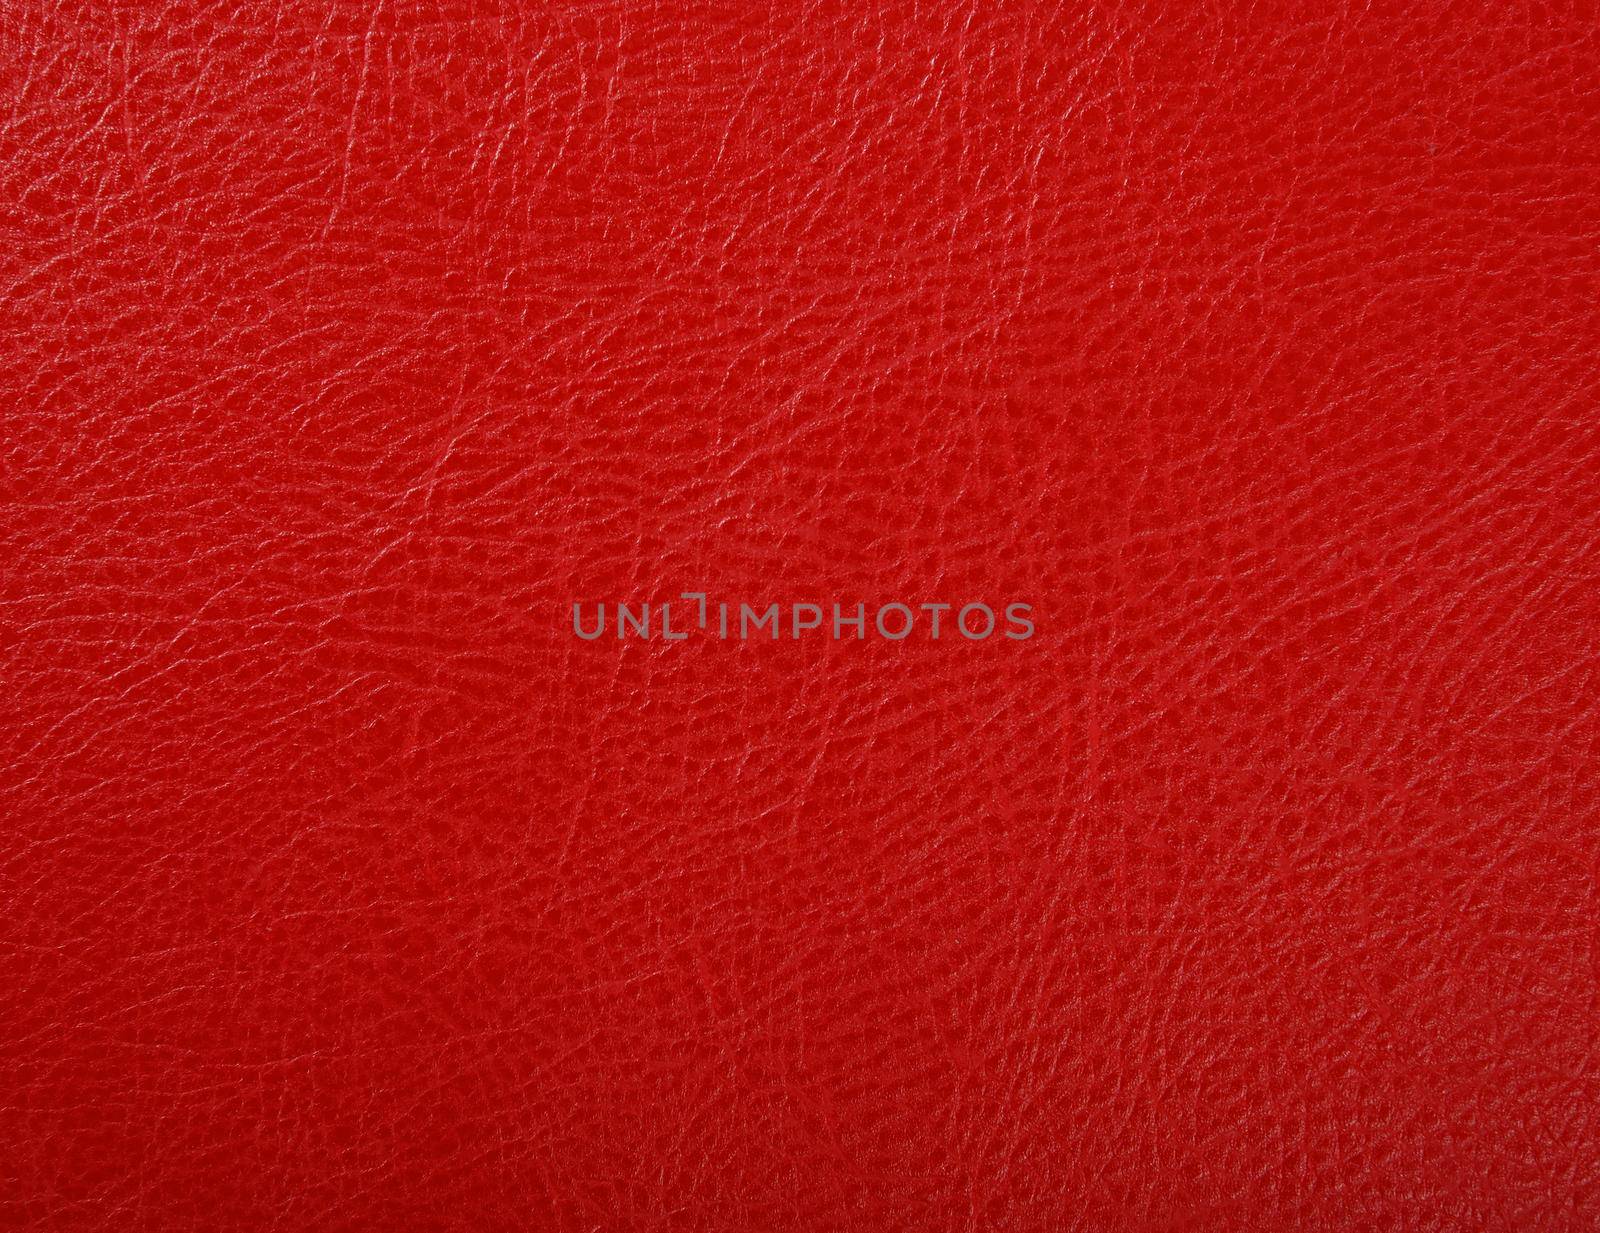 Background texture of red natural leather by BreakingTheWalls